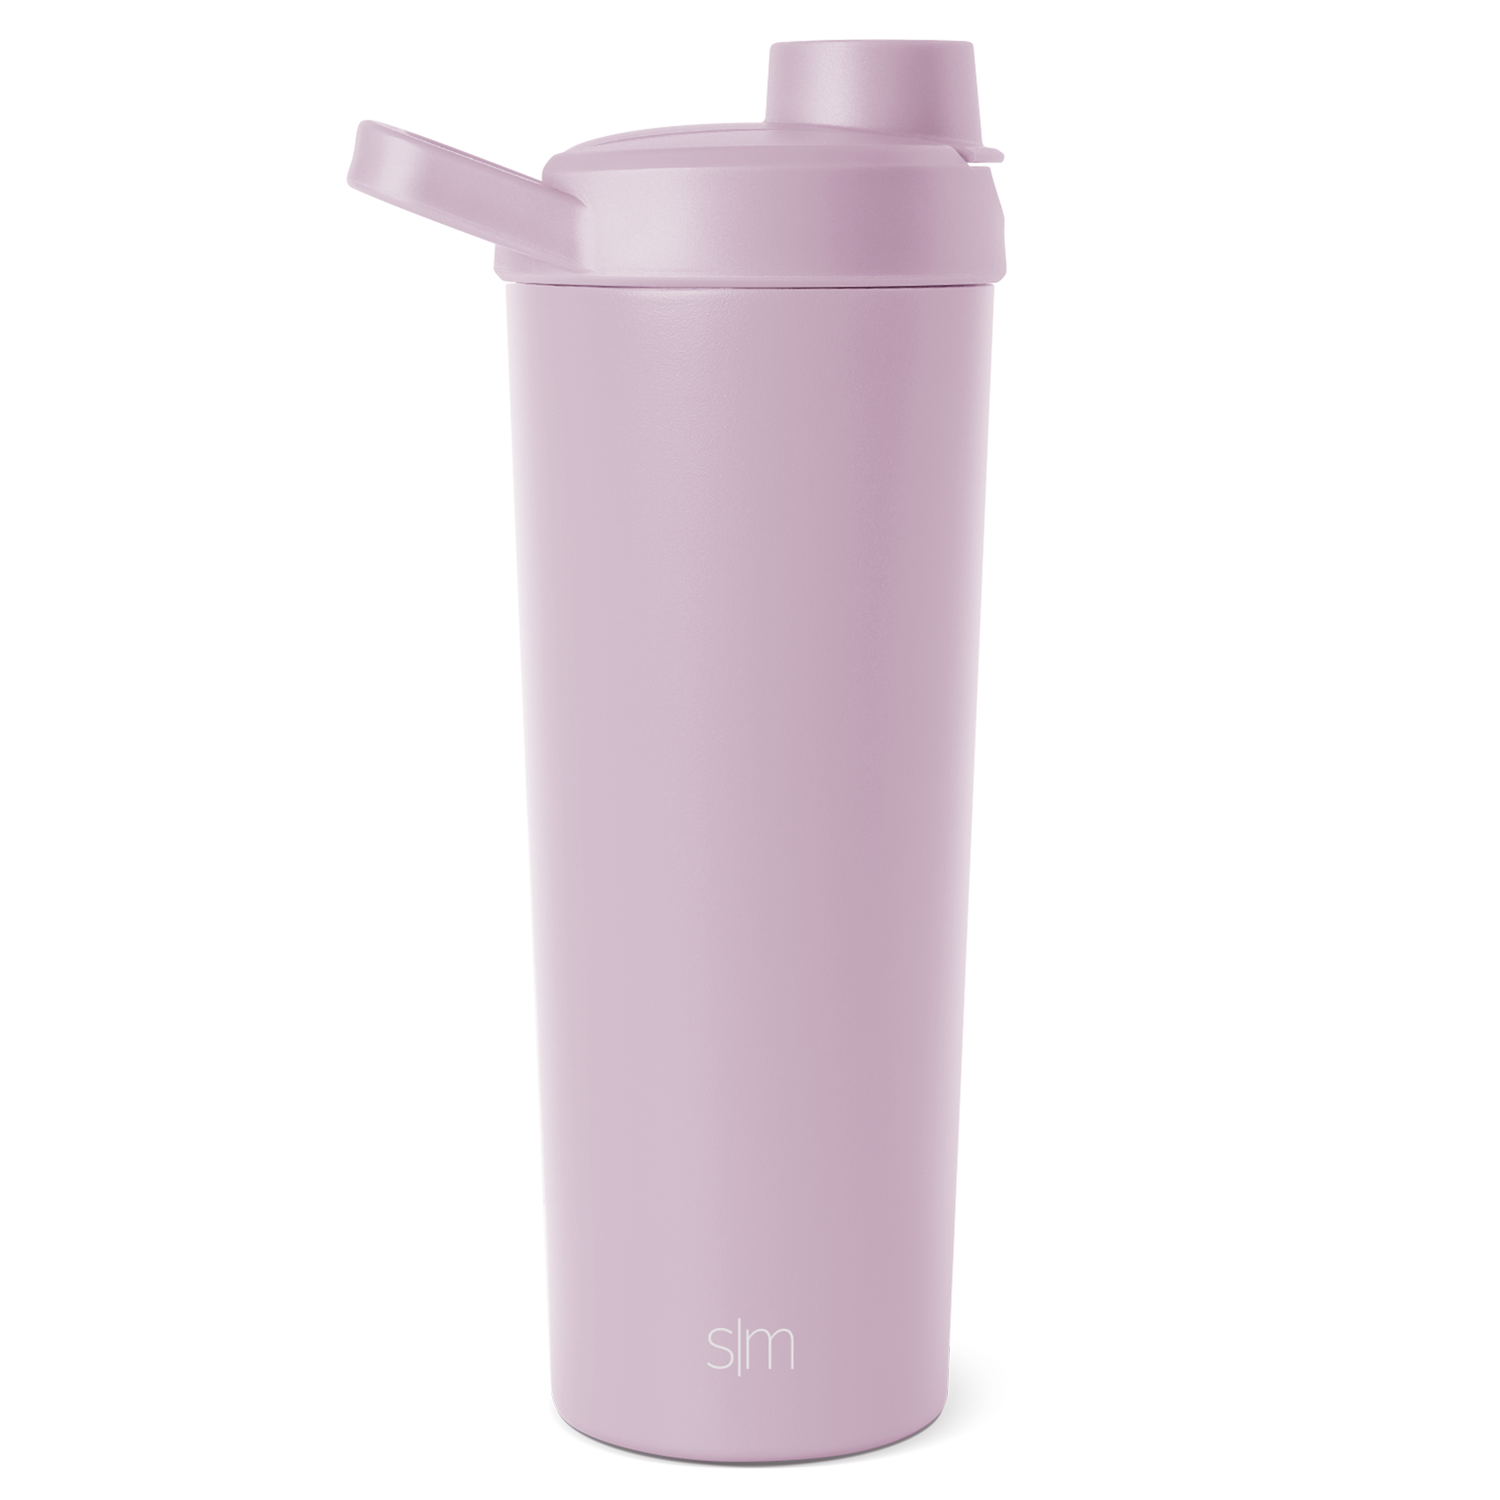 Electric Protein Shaker Bottle - AIGP4250 - IdeaStage Promotional